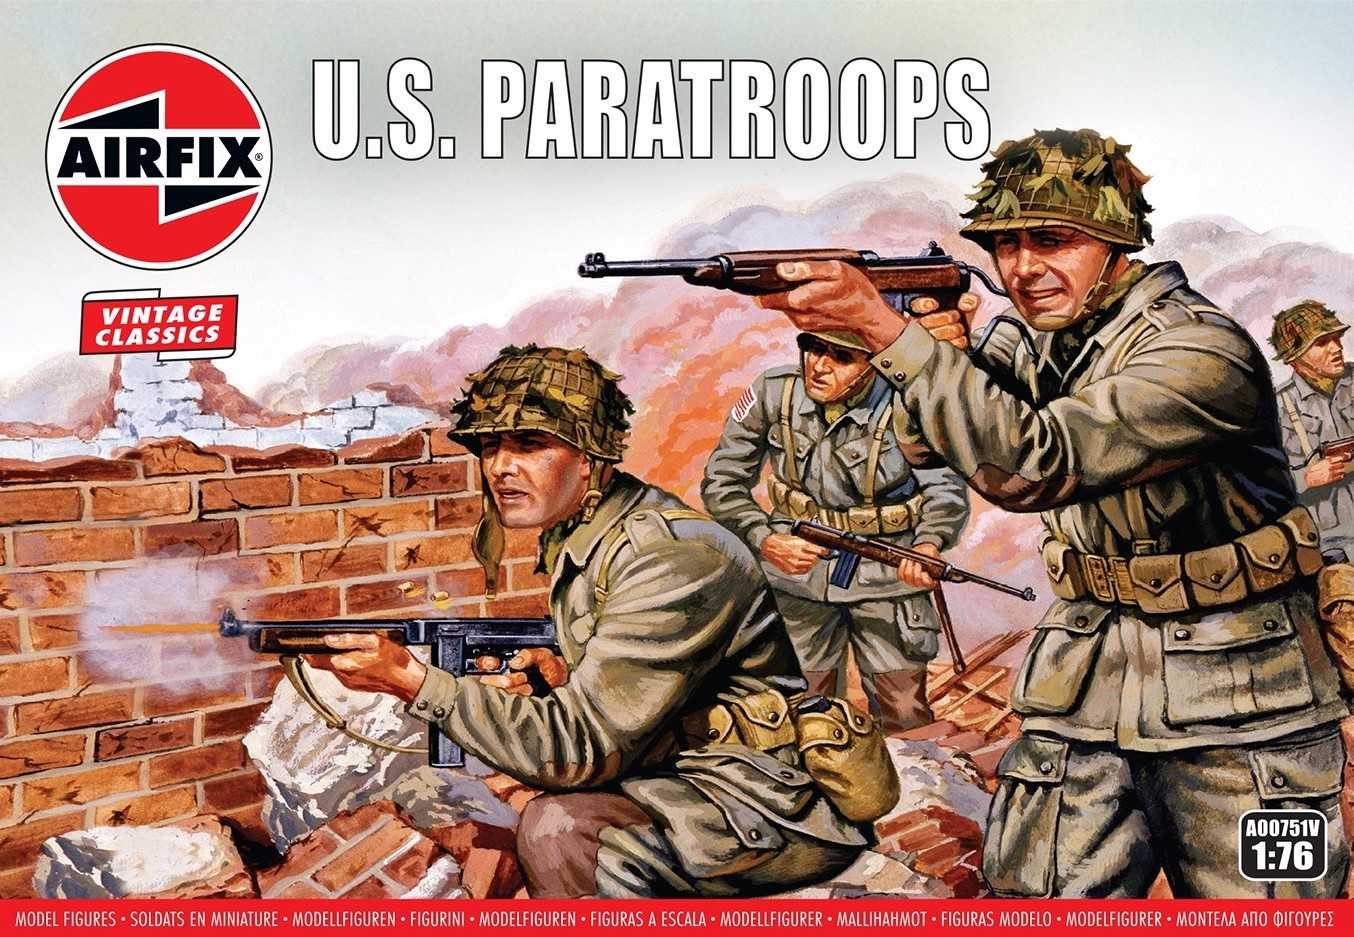 Figurines Airfix US Paratroops (WWII) Vintage Classic series '- 1/76 